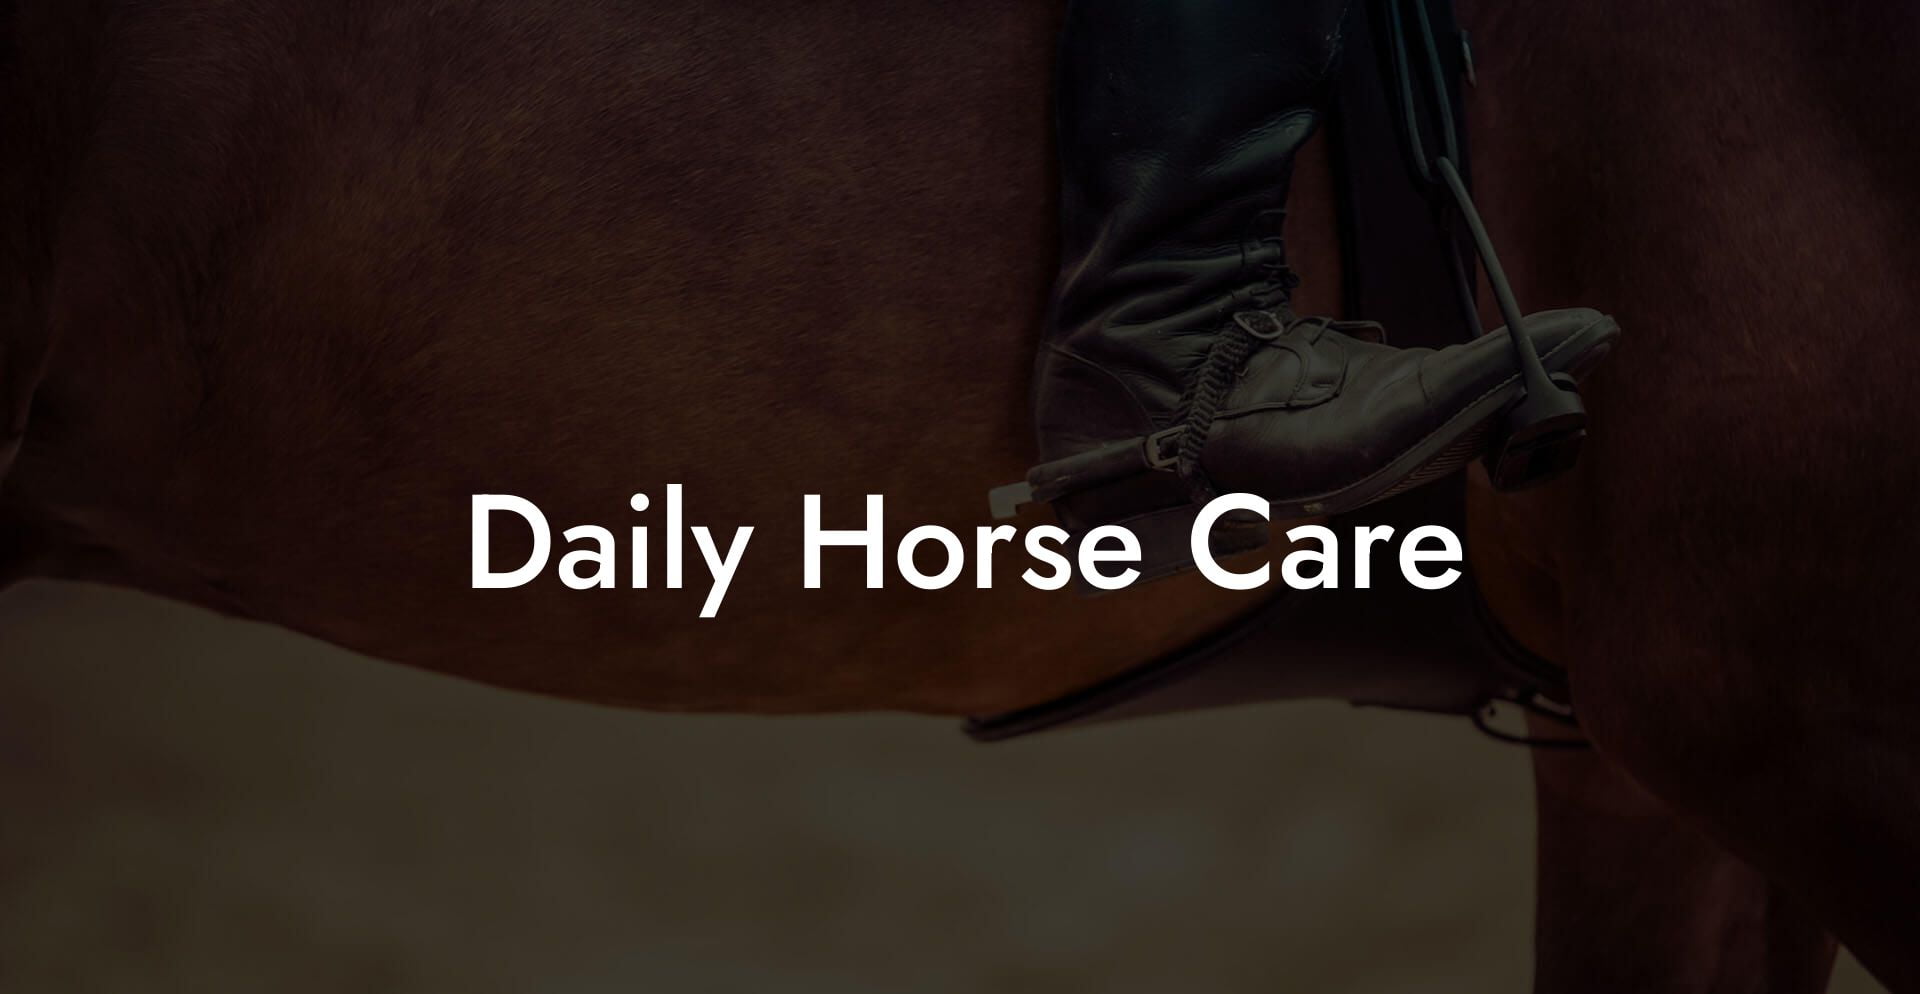 Daily Horse Care